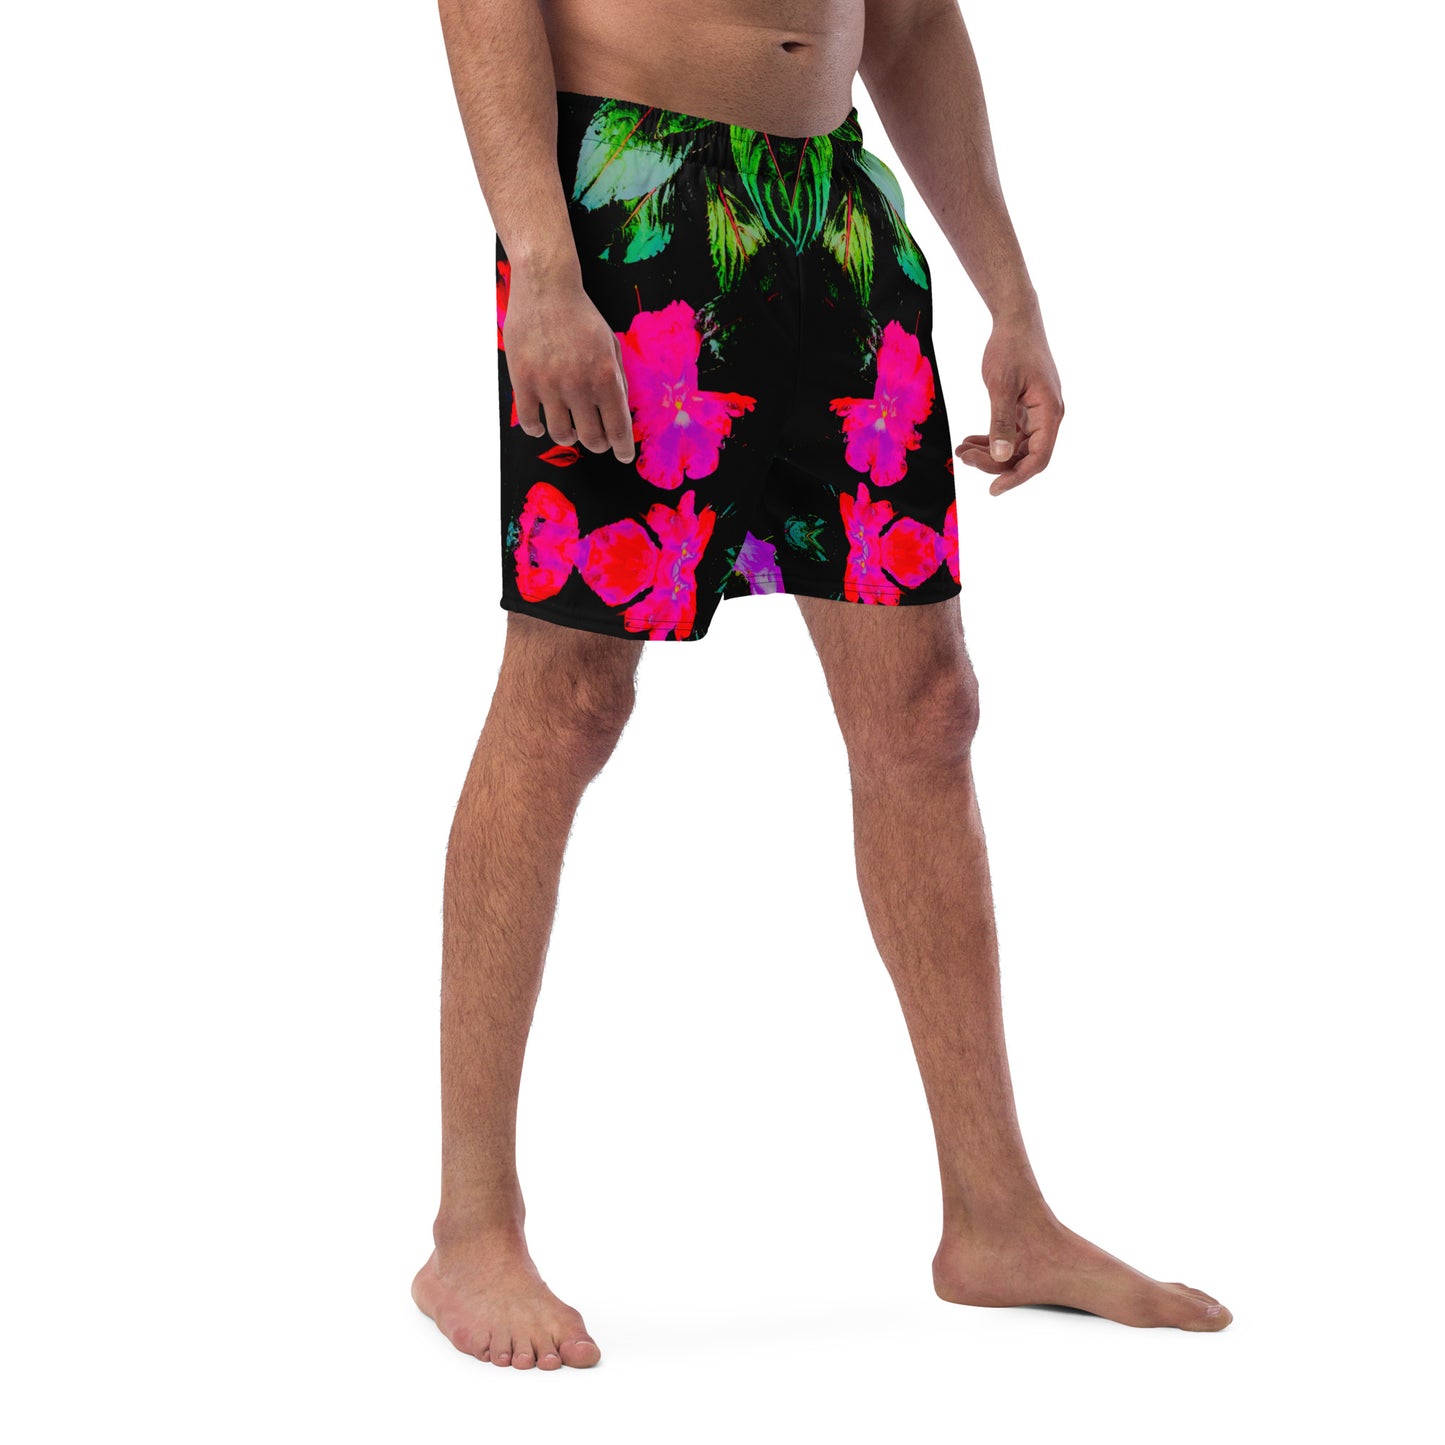 Busy Lizzy Men's Recycled Board Short UPF 50+